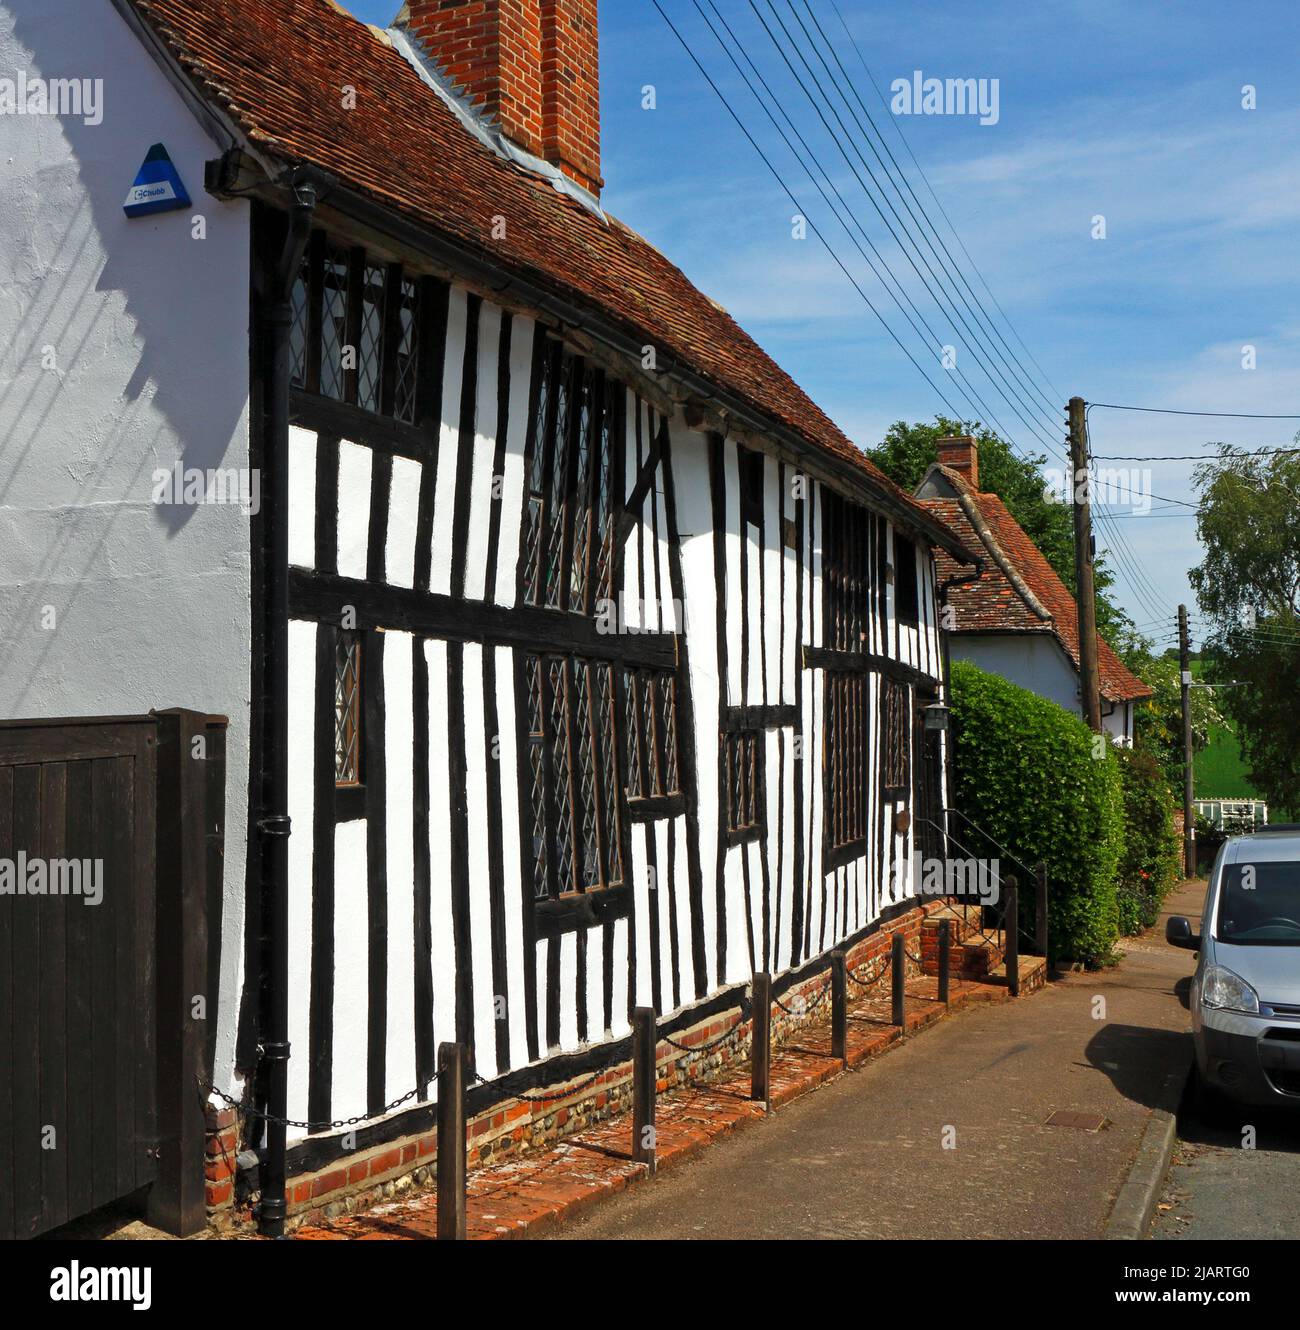 A fine example of a timber-framed medieval house in the well preserved village of Lavenham, Suffolk, England, United Kingdom. Stock Photo